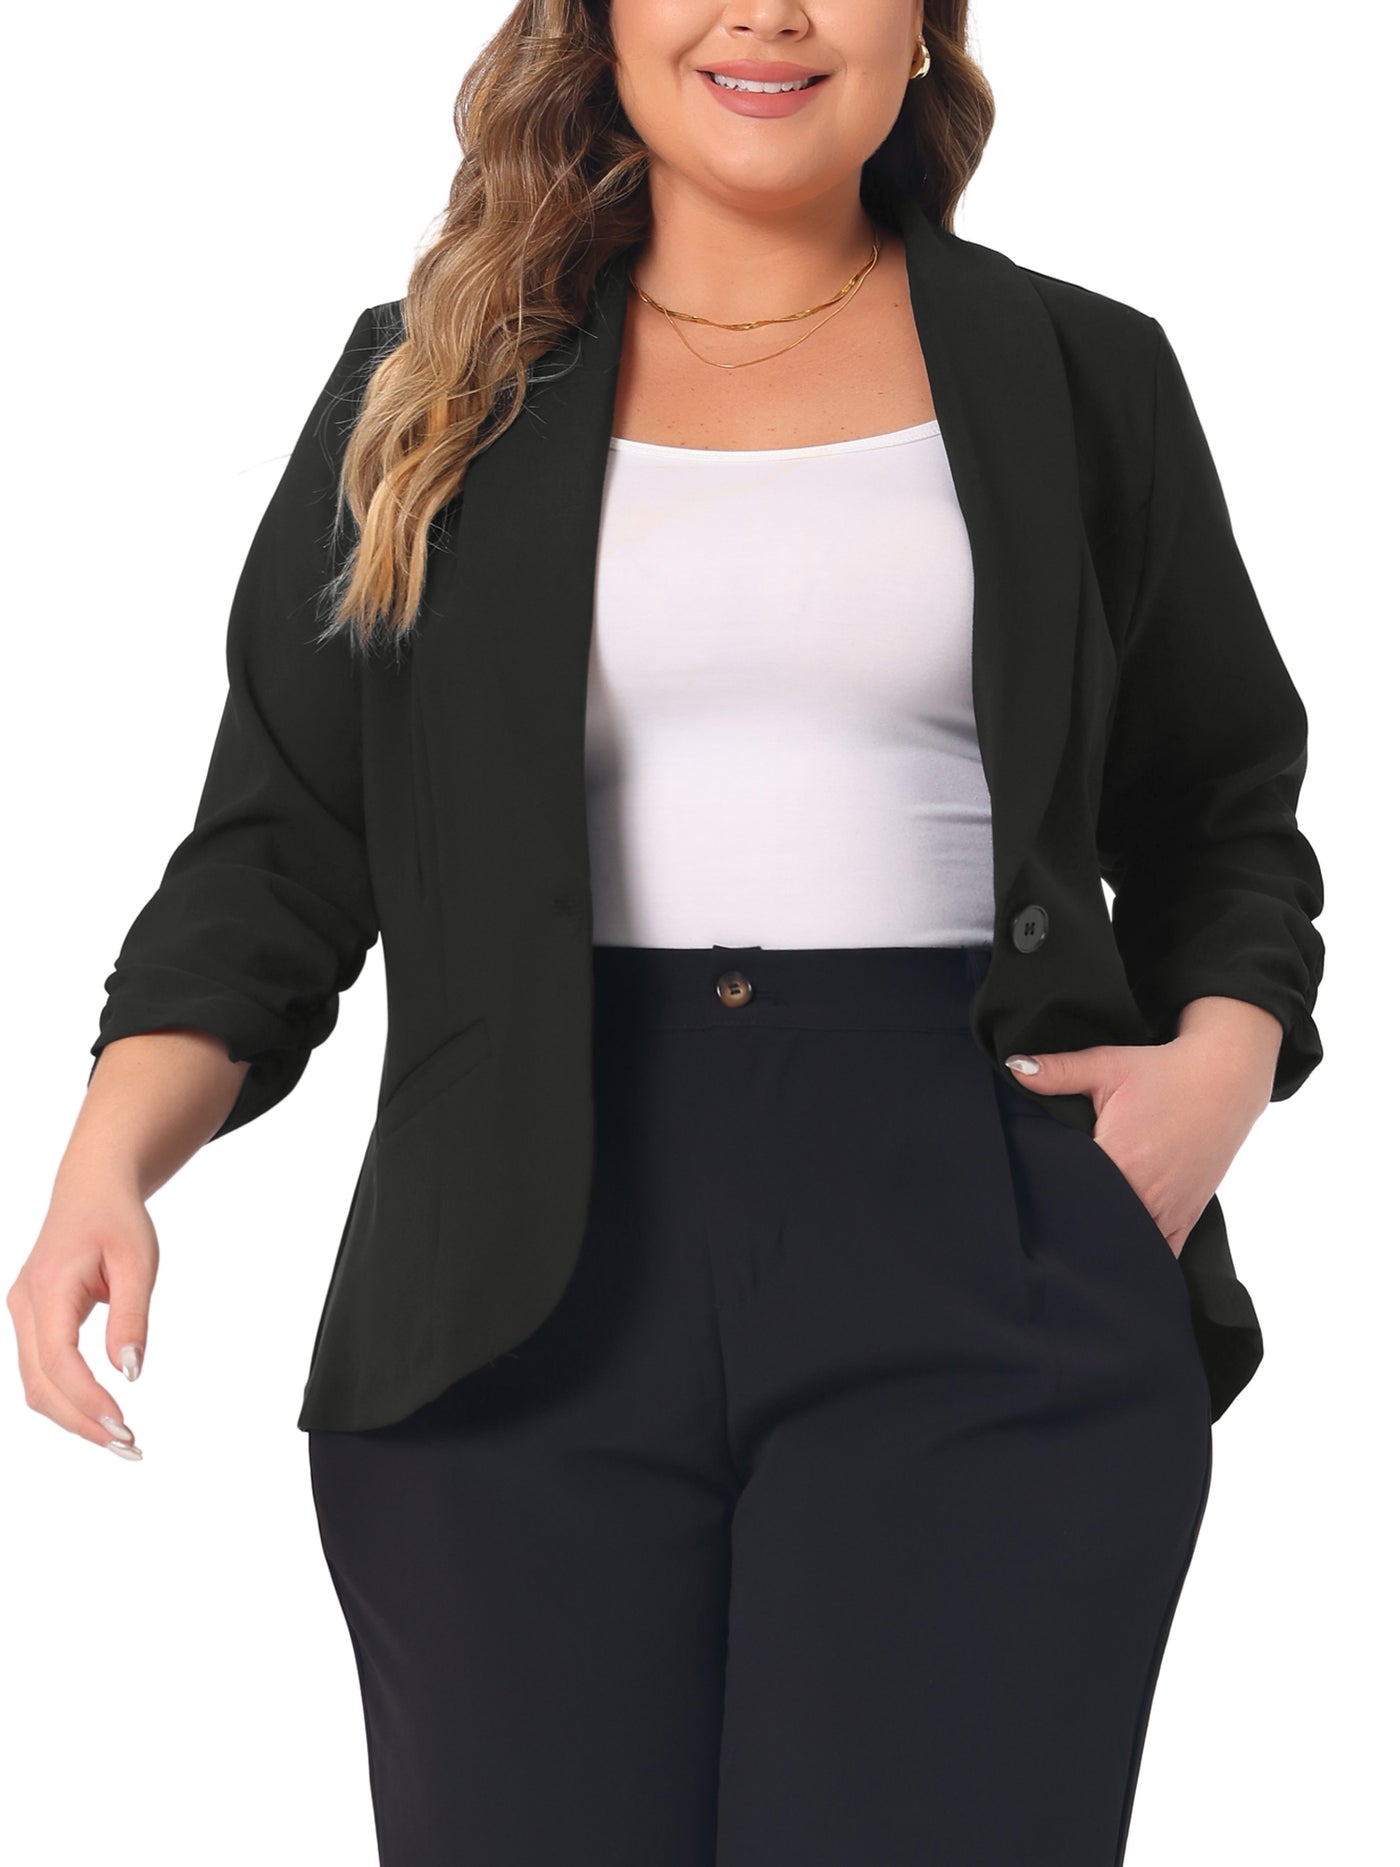 Bublédon Plus Size Blazer for Women 3/4 Ruched Sleeve Open Front Lightweight Work Office Suit Jacket